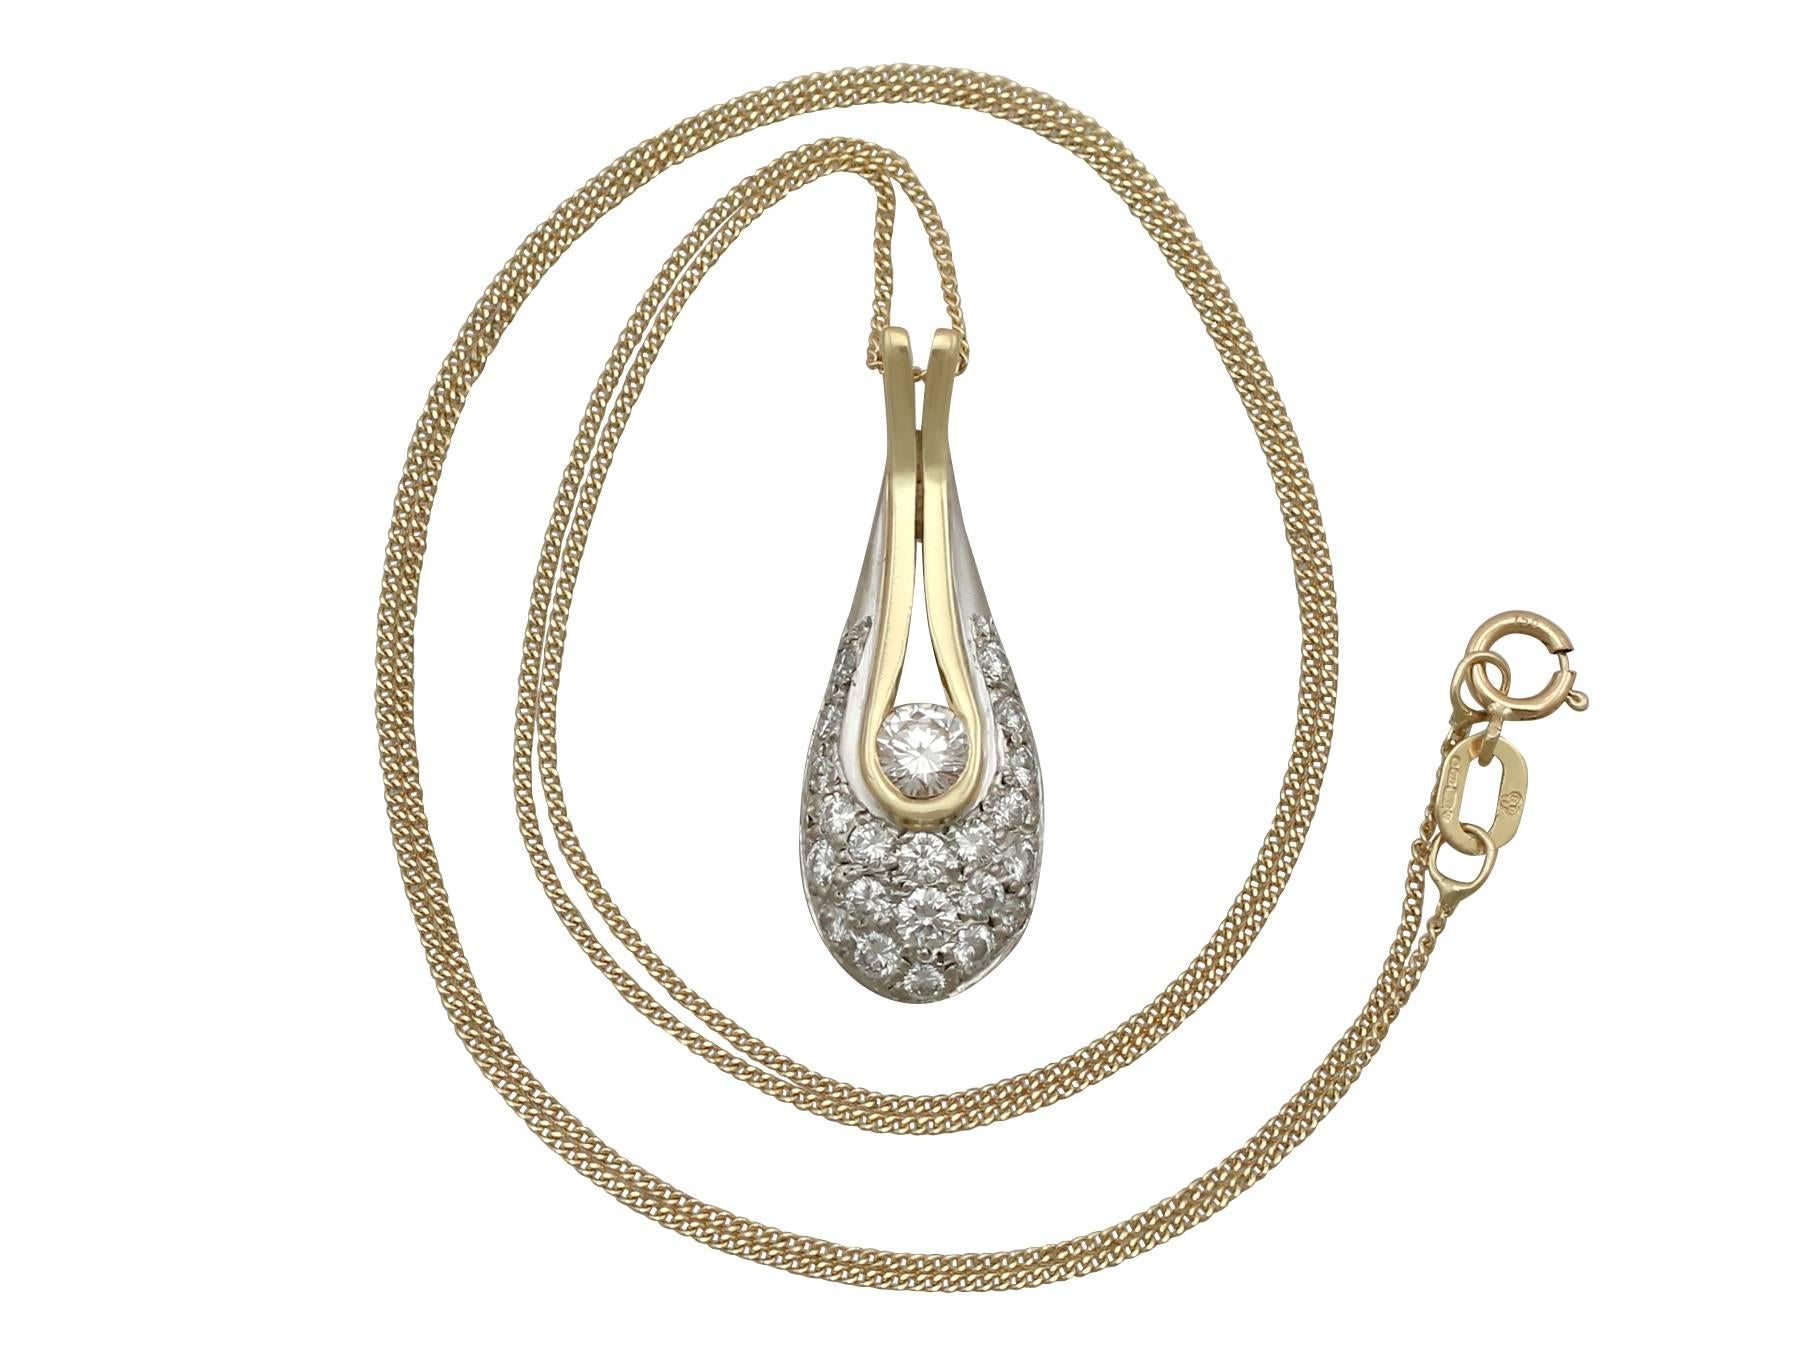 An impressive vintage 0.93 carat diamond, 18 karat yellow gold and 18 karat white gold 'teardrop' pendant; part of our diverse vintage jewelry collections.

This fine and impressive diamond teardrop pendant has been crafted in 18k yellow gold and